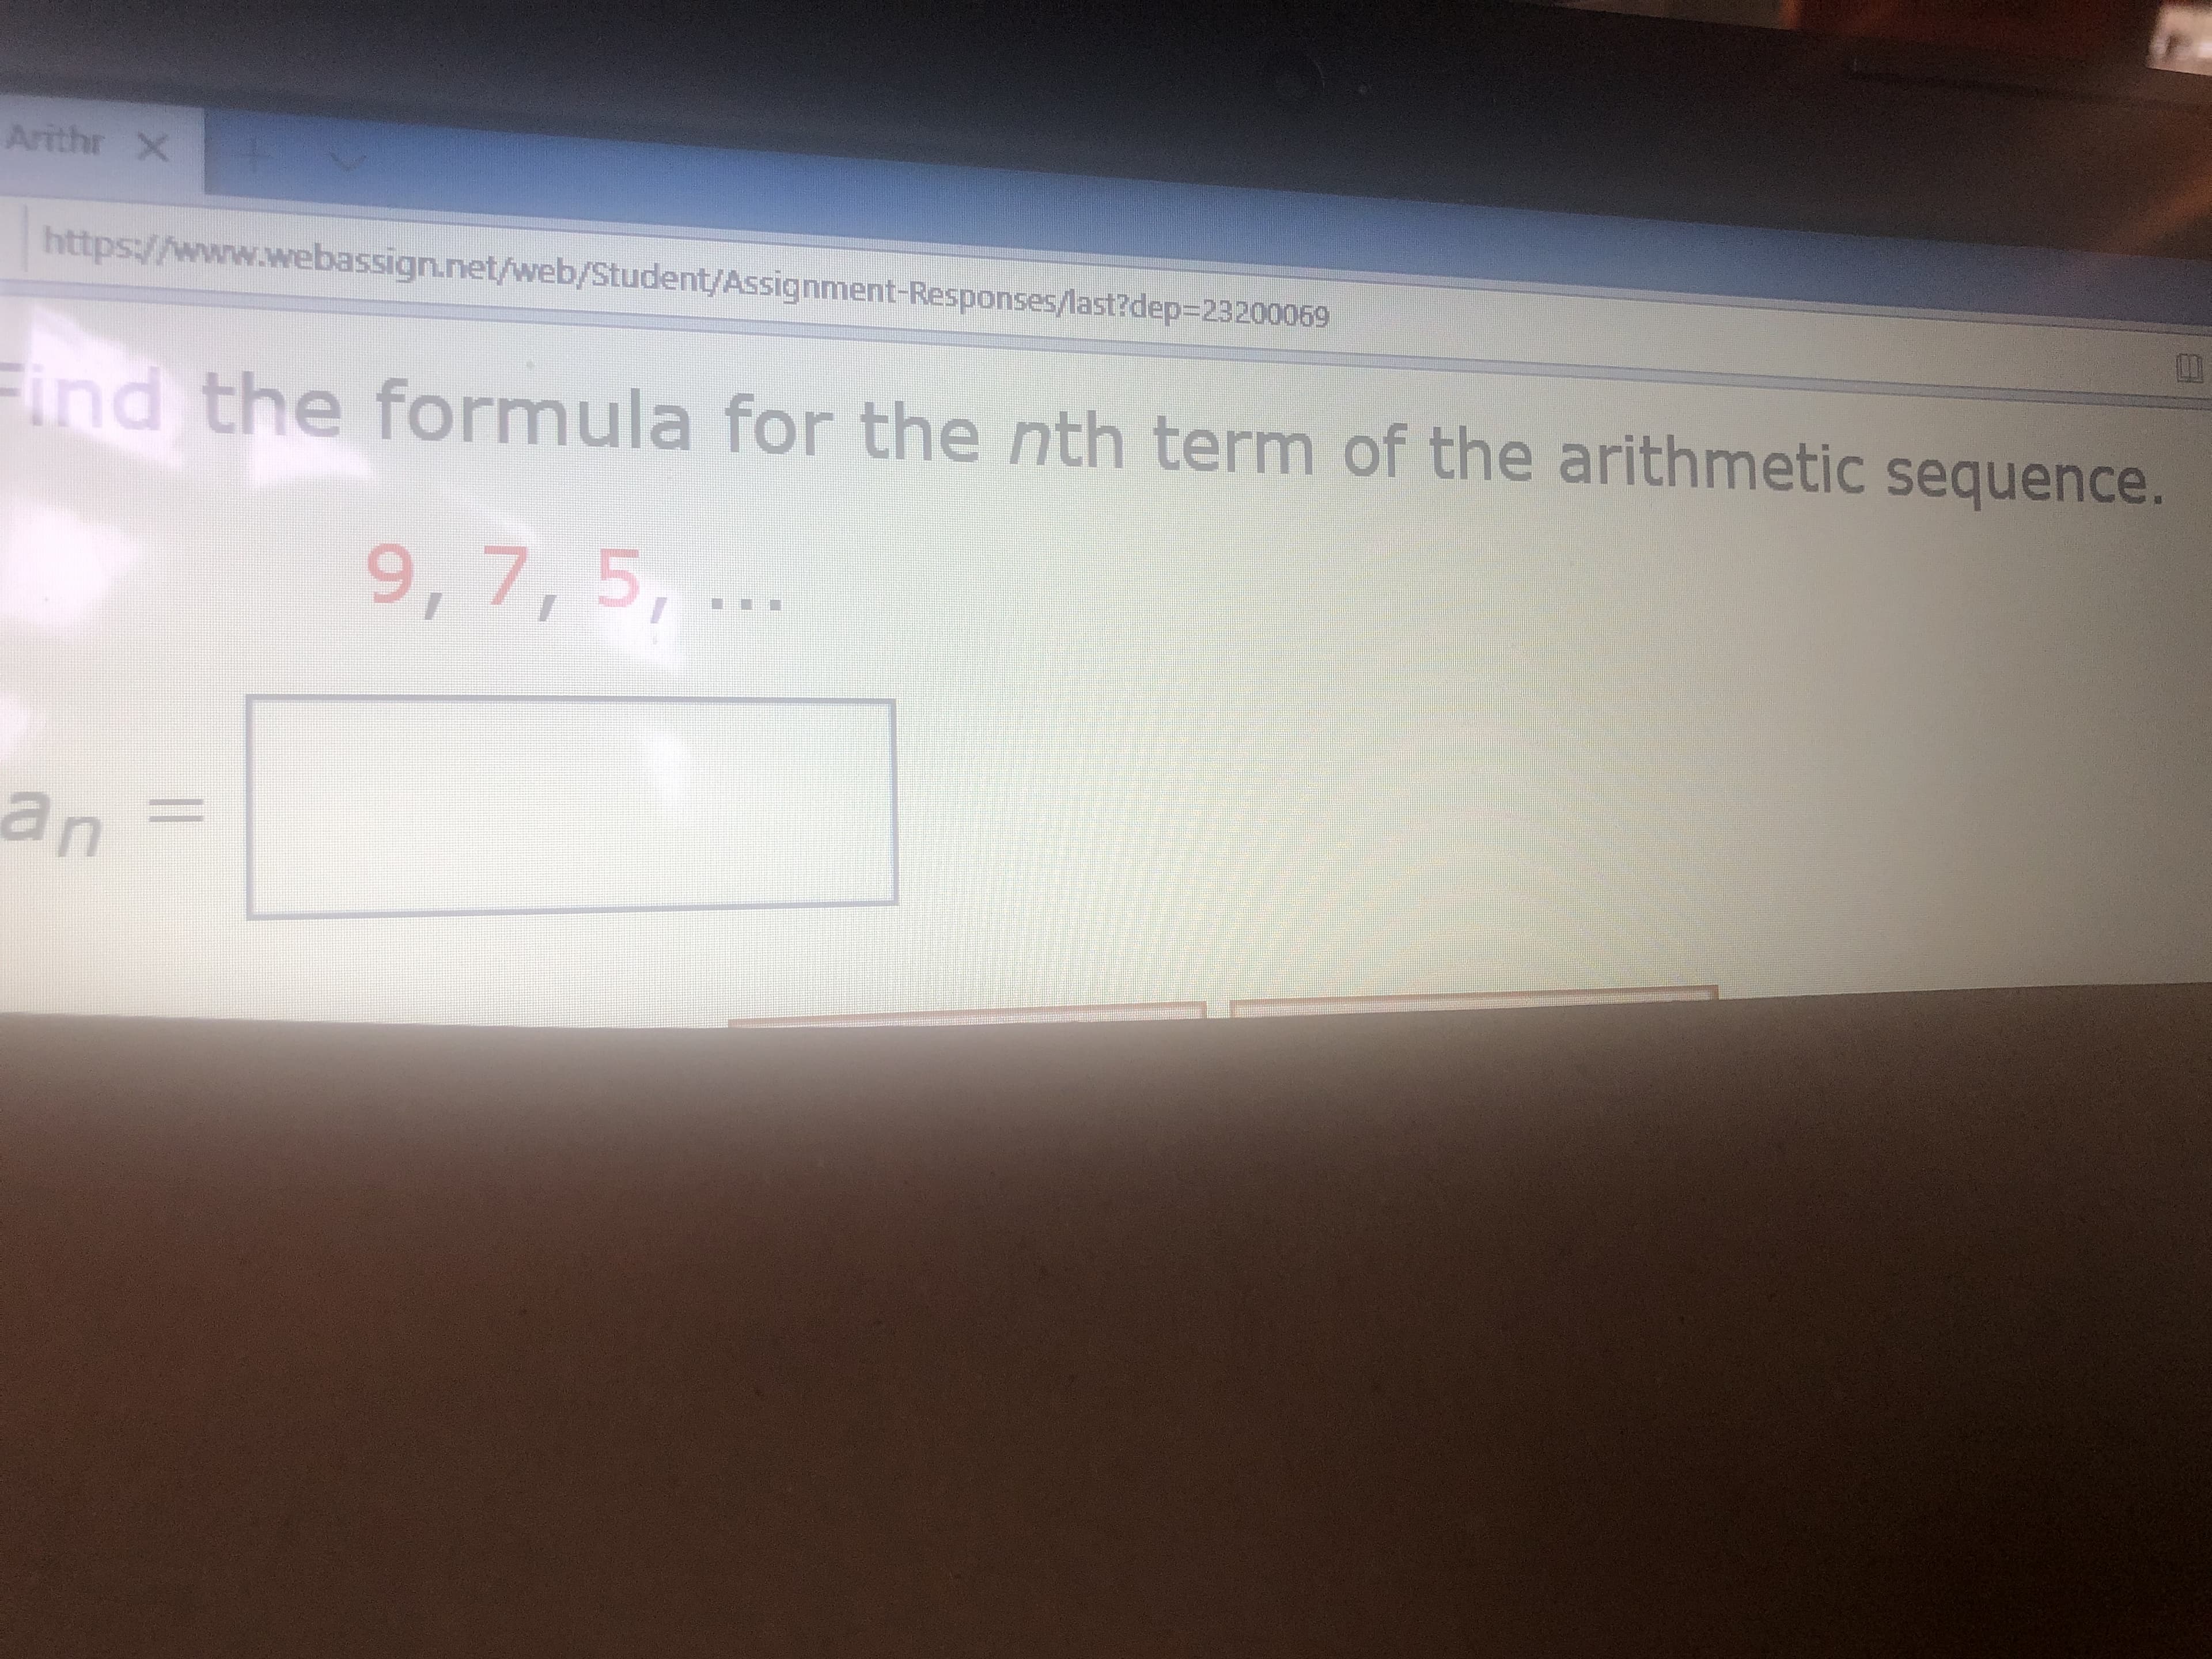 ind the formula for the nth term of the arithmetic sequence.
9,7,5,
.
